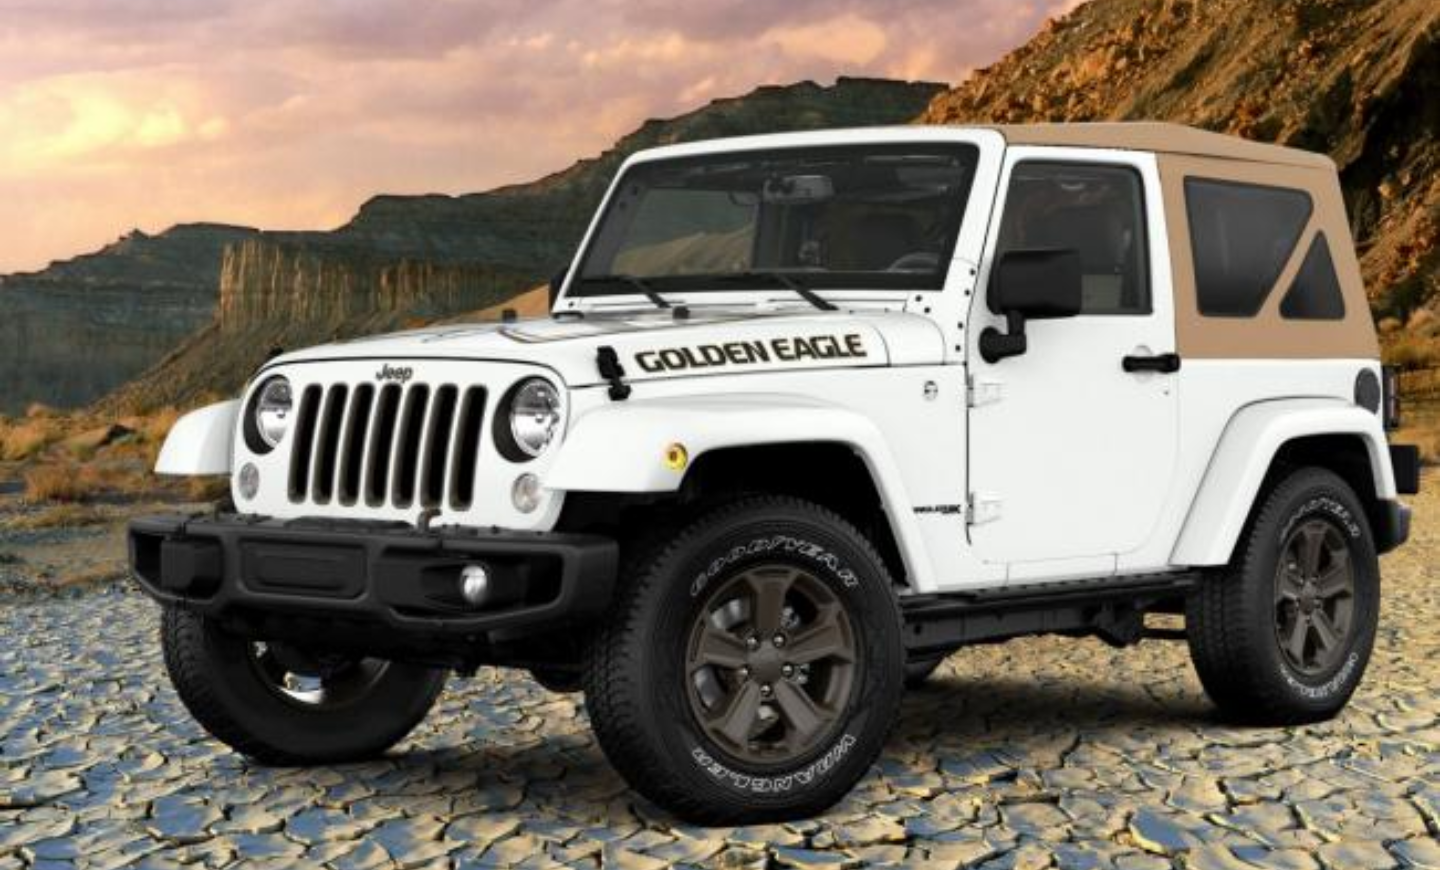 Dukes of Hazzard Collector: Official Jeep Pays Homage To Daisy Duke and the  Dukes of Hazzard On 2018 Golden Eagle Wrangler